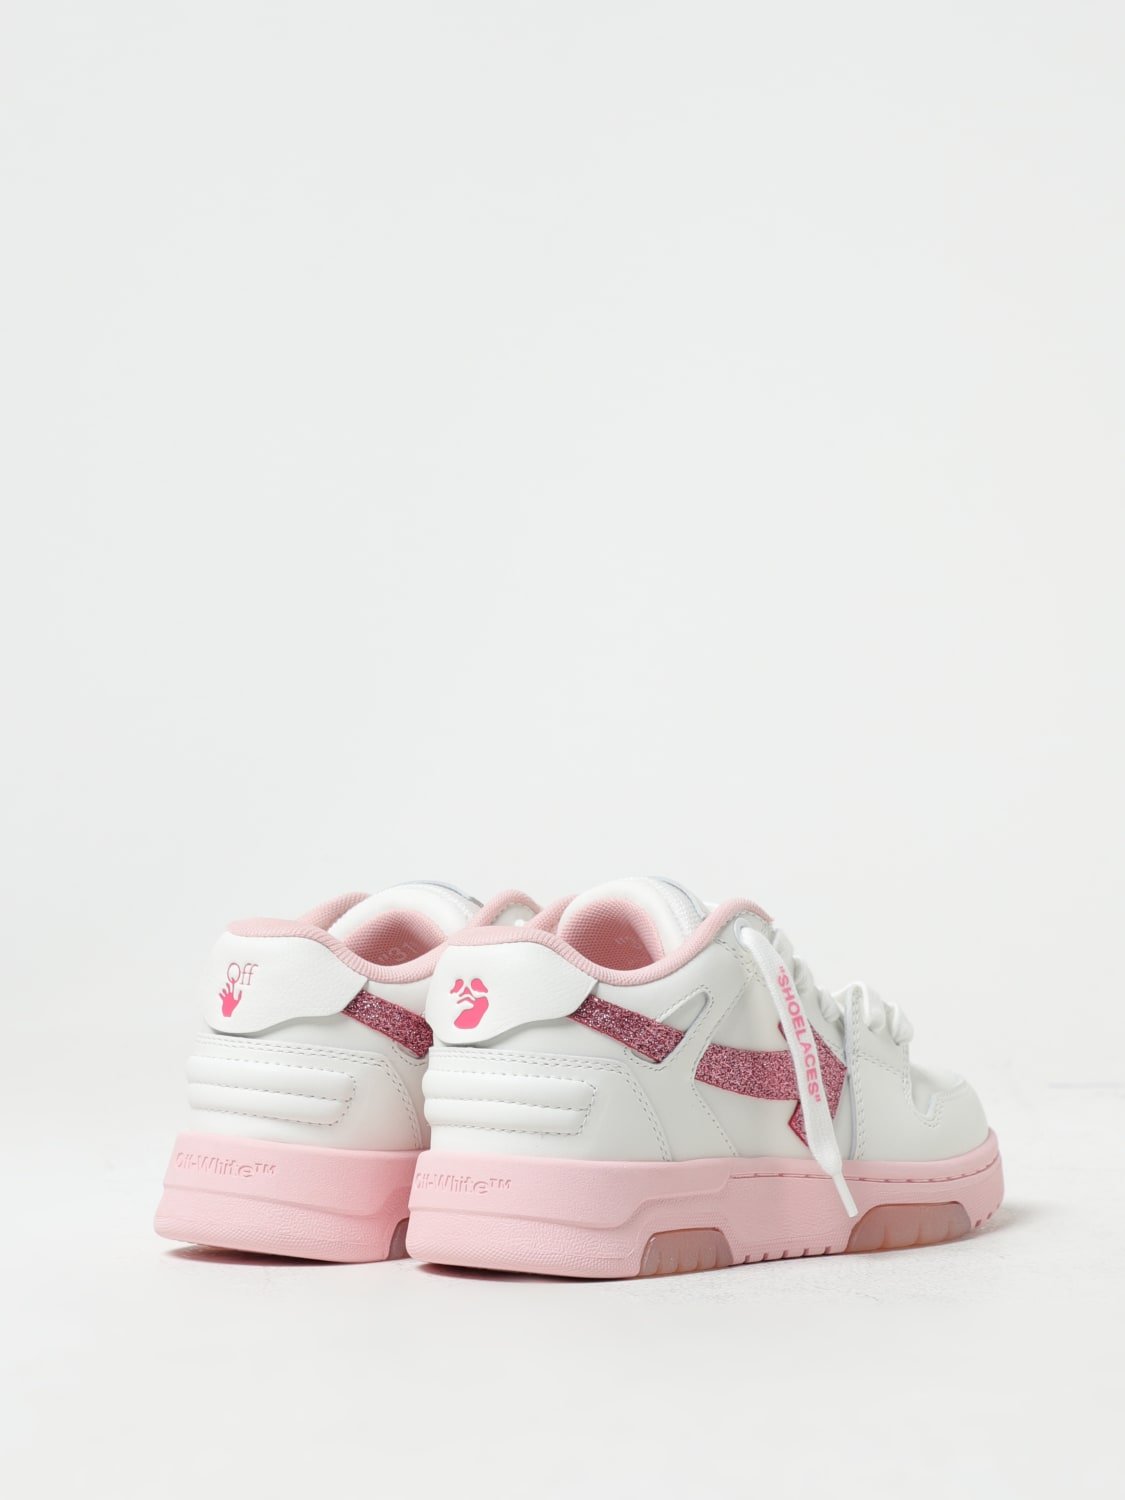 OFF-WHITE: Out Of Office leather sneakers - White  Off-White sneakers  OGIA007F23LEA003 online at